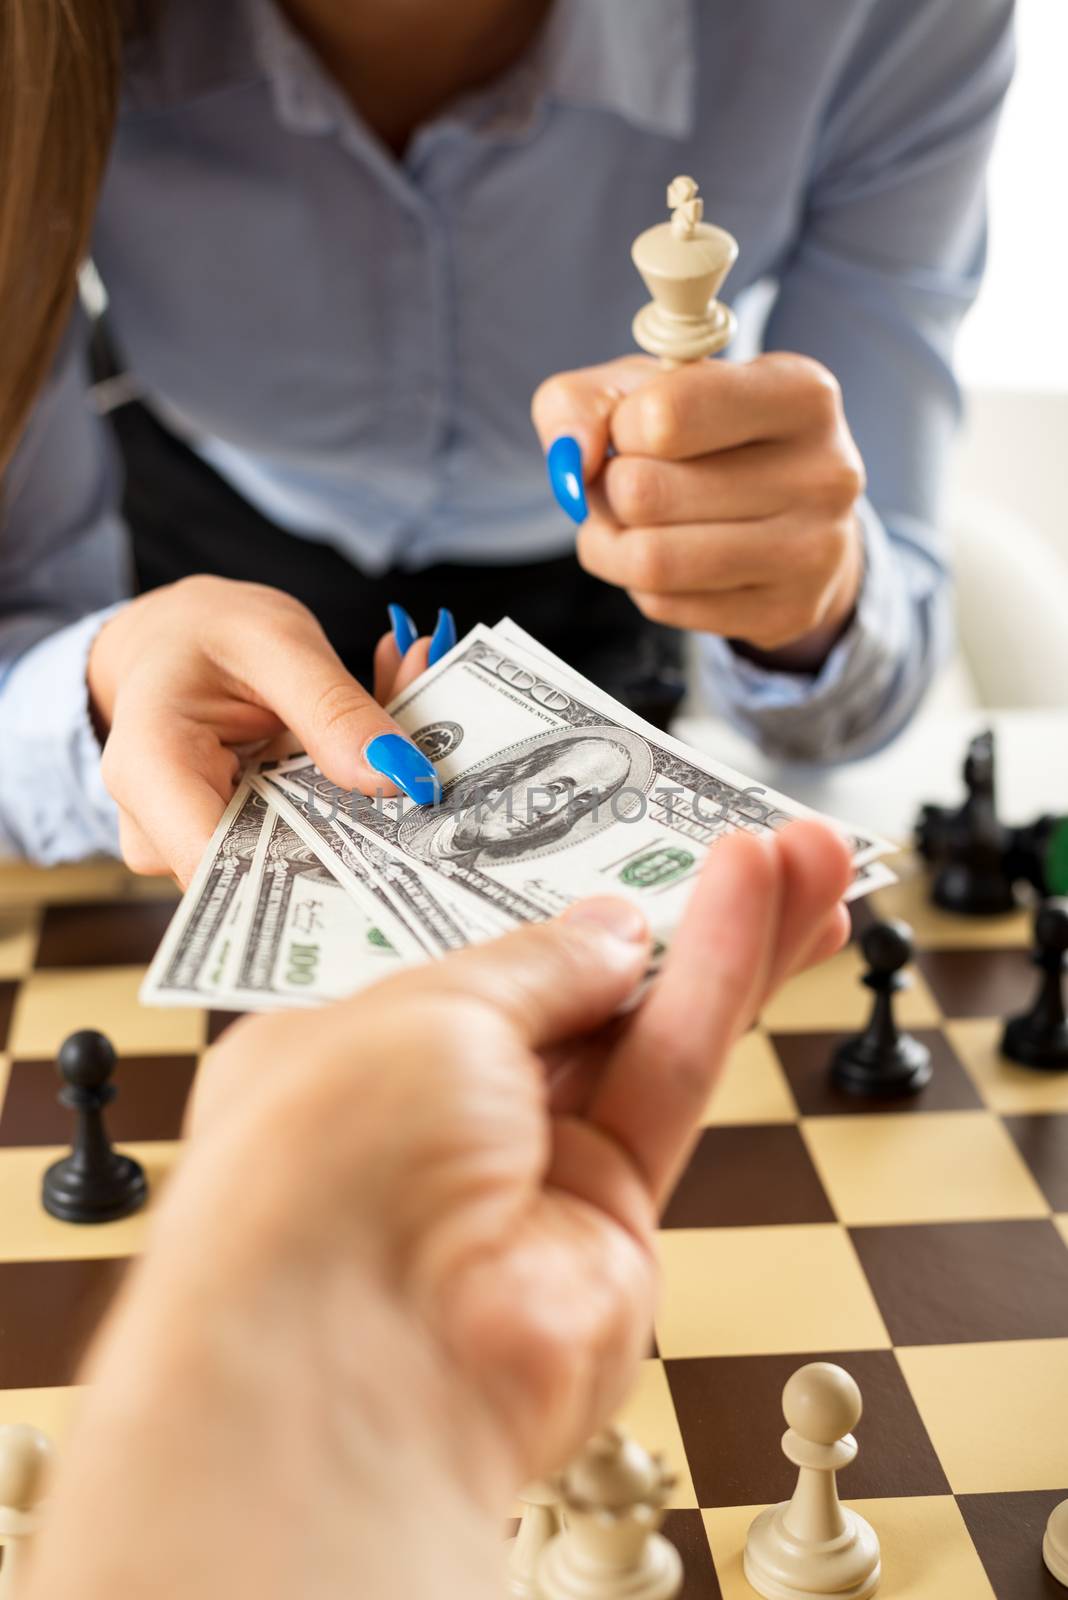 Close-up of female hands with painted fingernails over the chessboard. One hand takes money from the man's hand, and the other female hand holding in the hand white king chess piece.